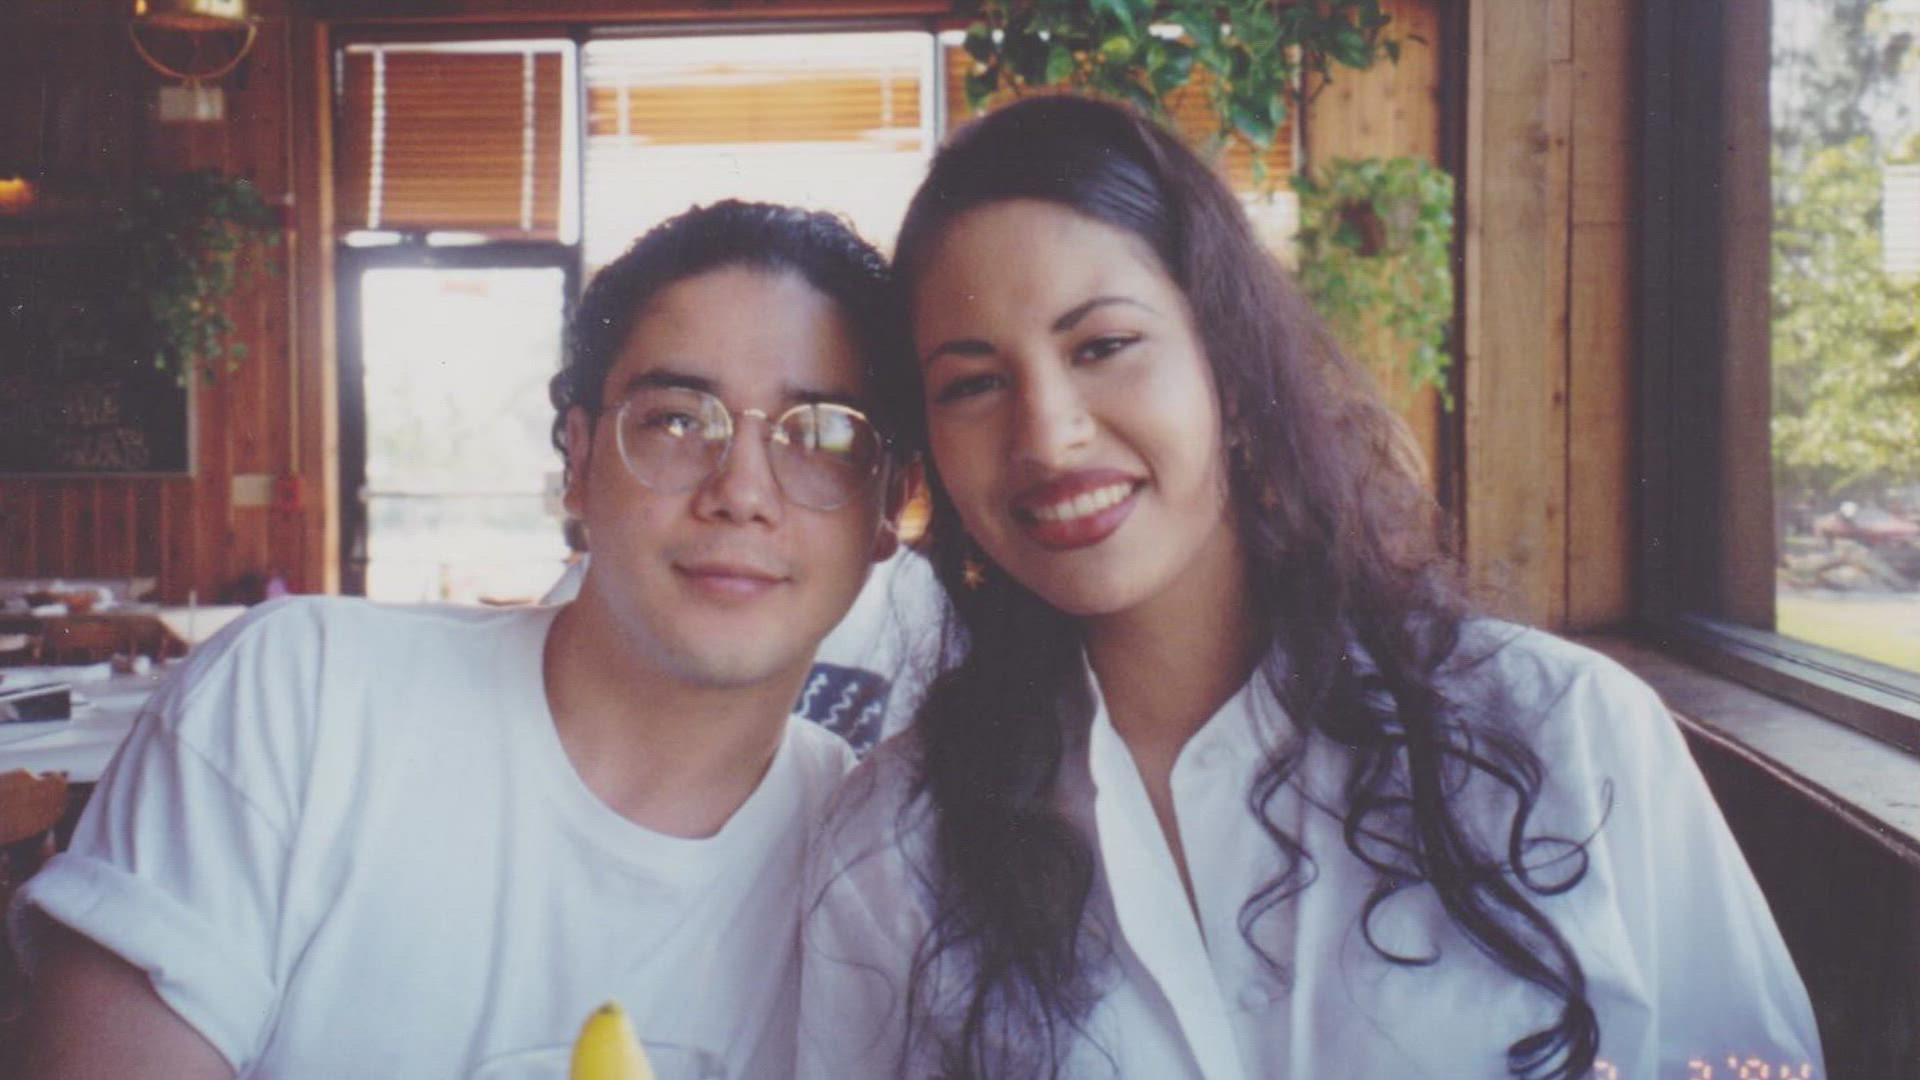 Perez posted the photo of the pair in a restaurant in 1994 with the caption "So, just found this pic. Selena and Chris."